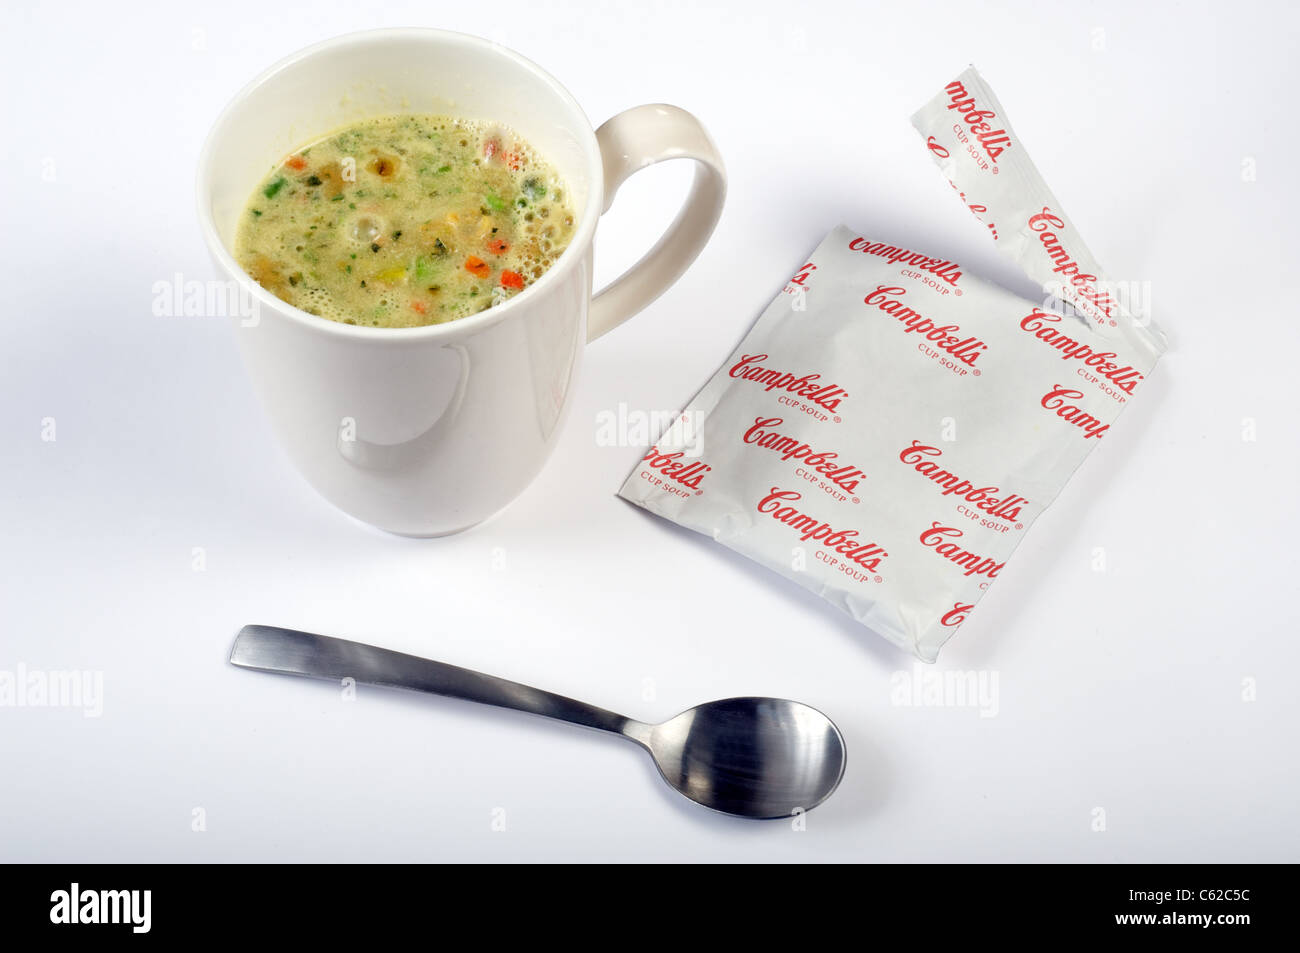 Campbells cup soup Stock Photo